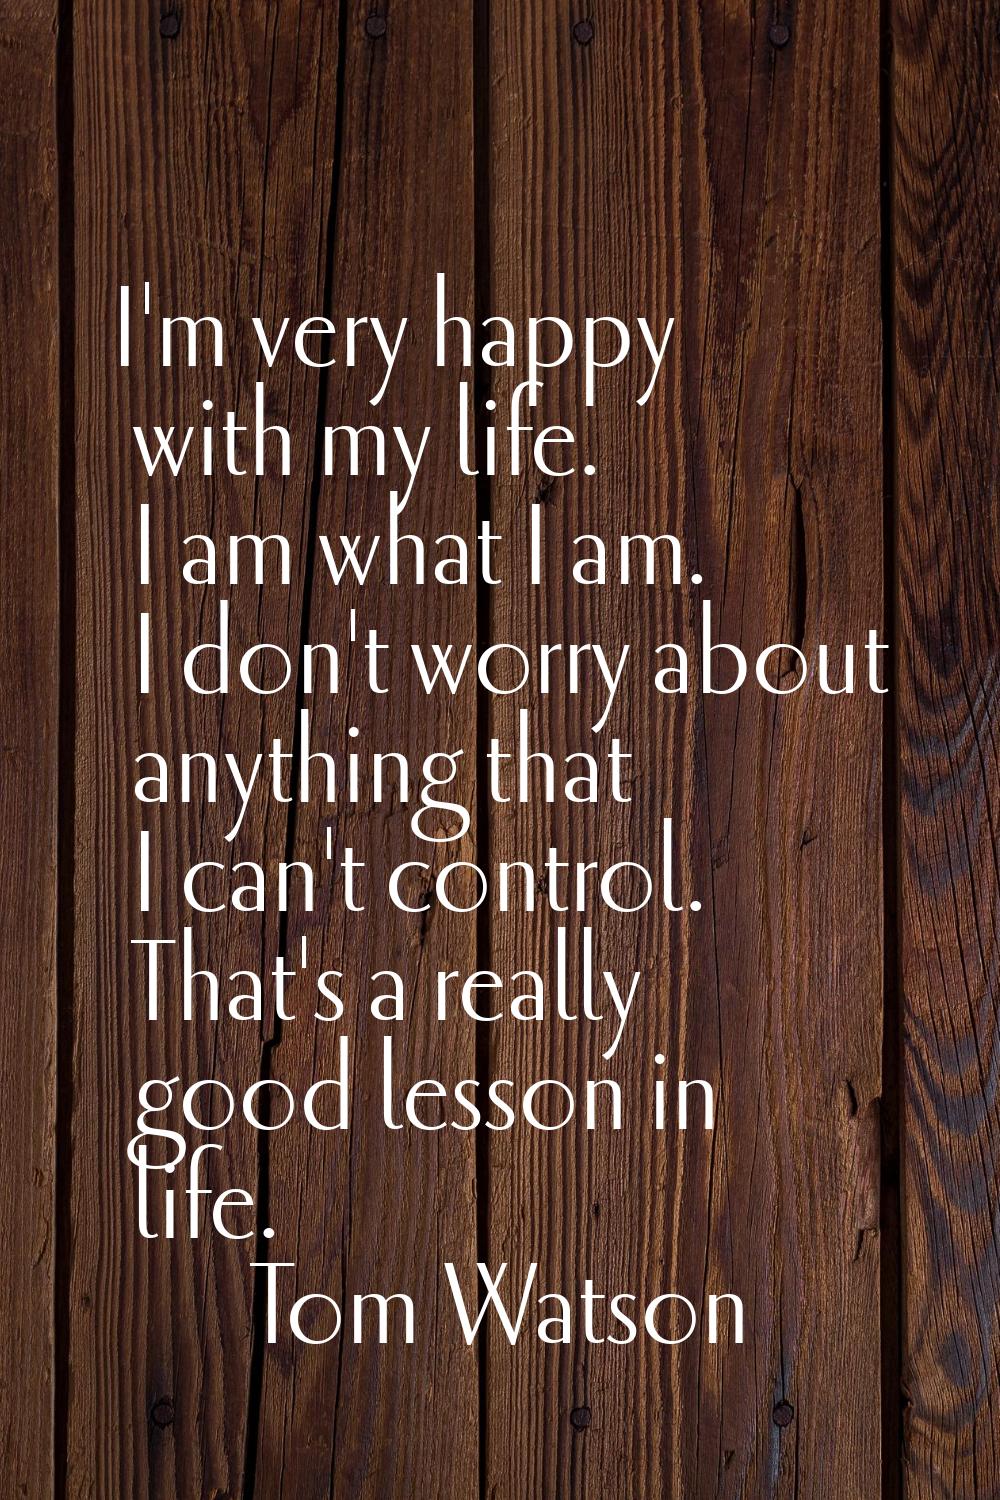 I'm very happy with my life. I am what I am. I don't worry about anything that I can't control. Tha